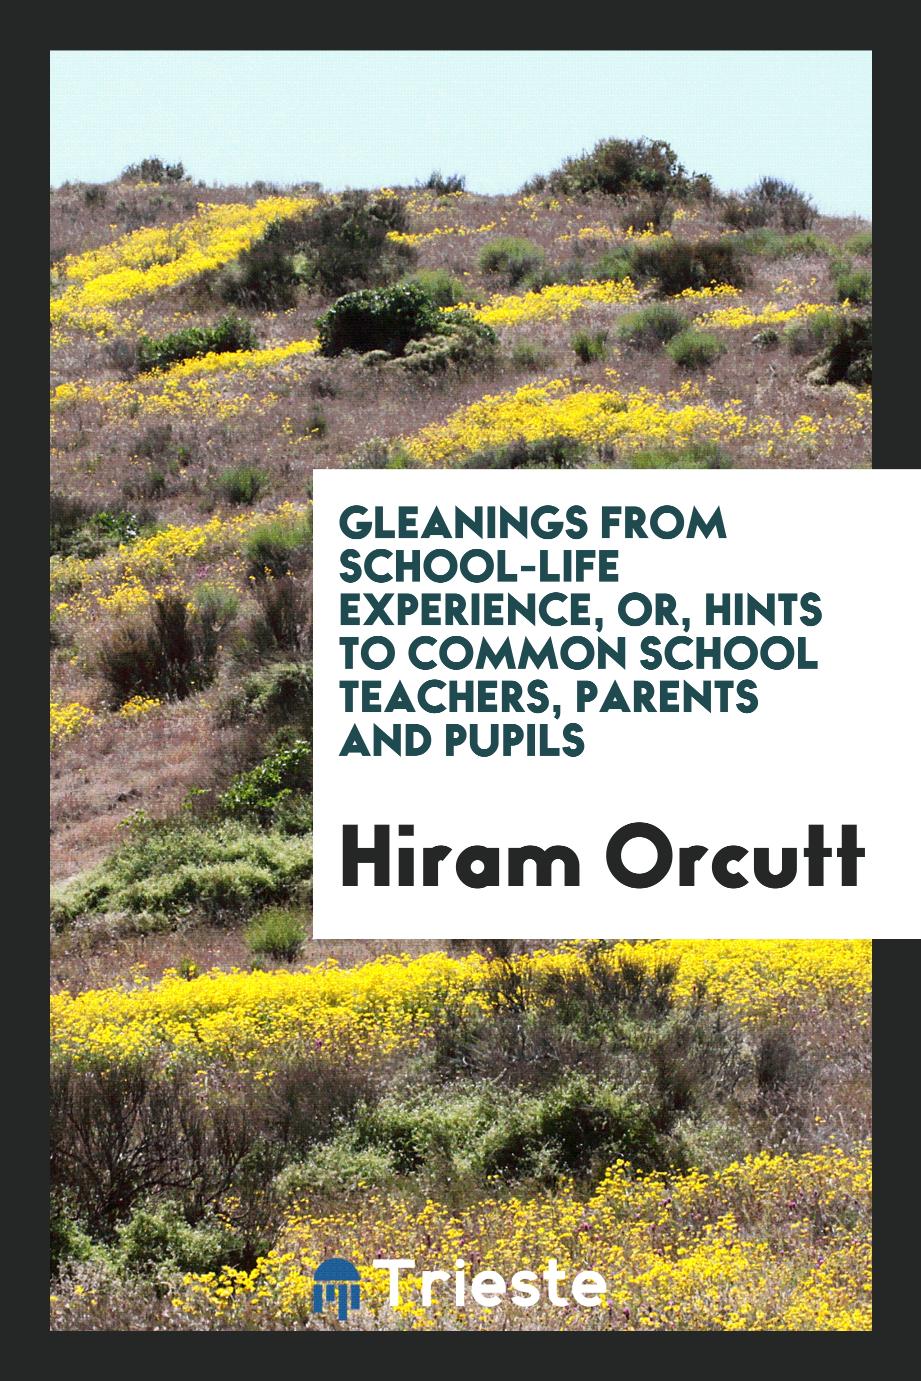 Gleanings from School-life Experience, Or, Hints to Common School Teachers, parents and pupils